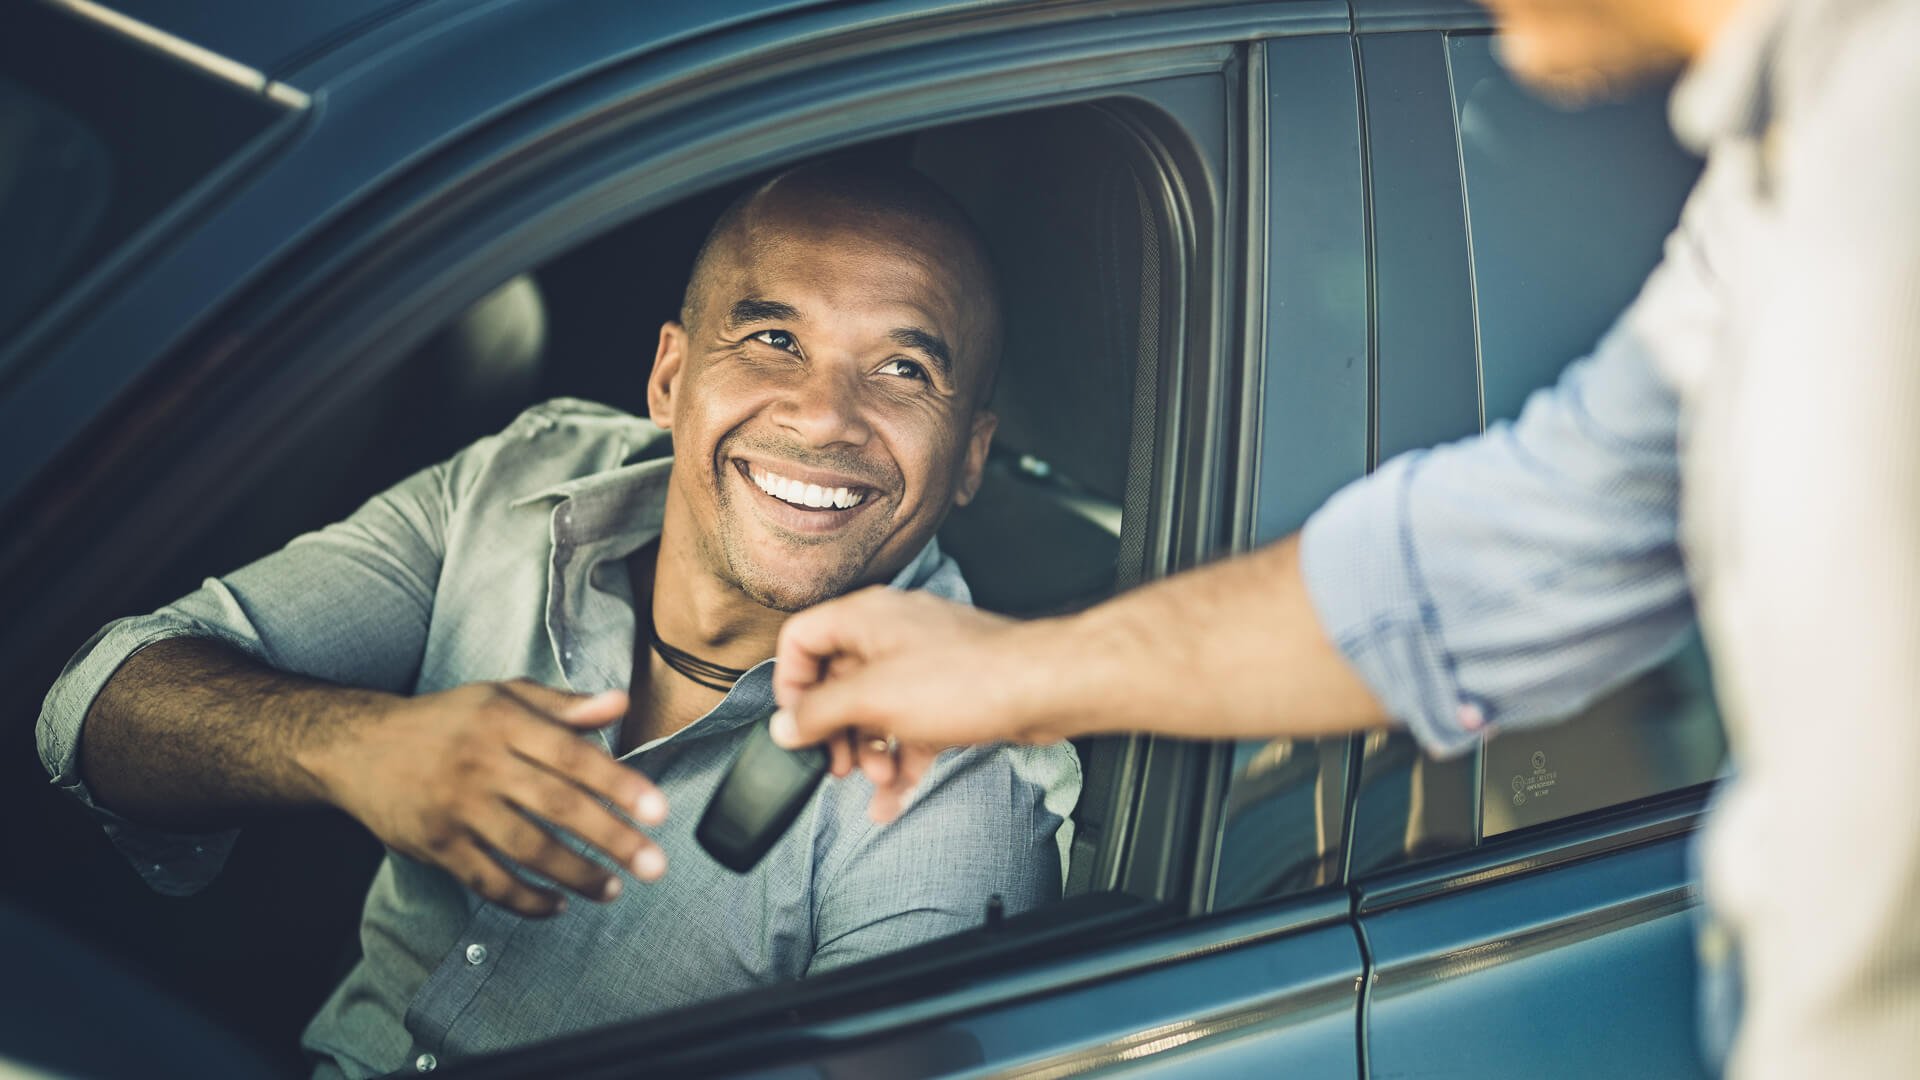 5 Questions To Ask When Deciding If You Should Buy a New or Used Car